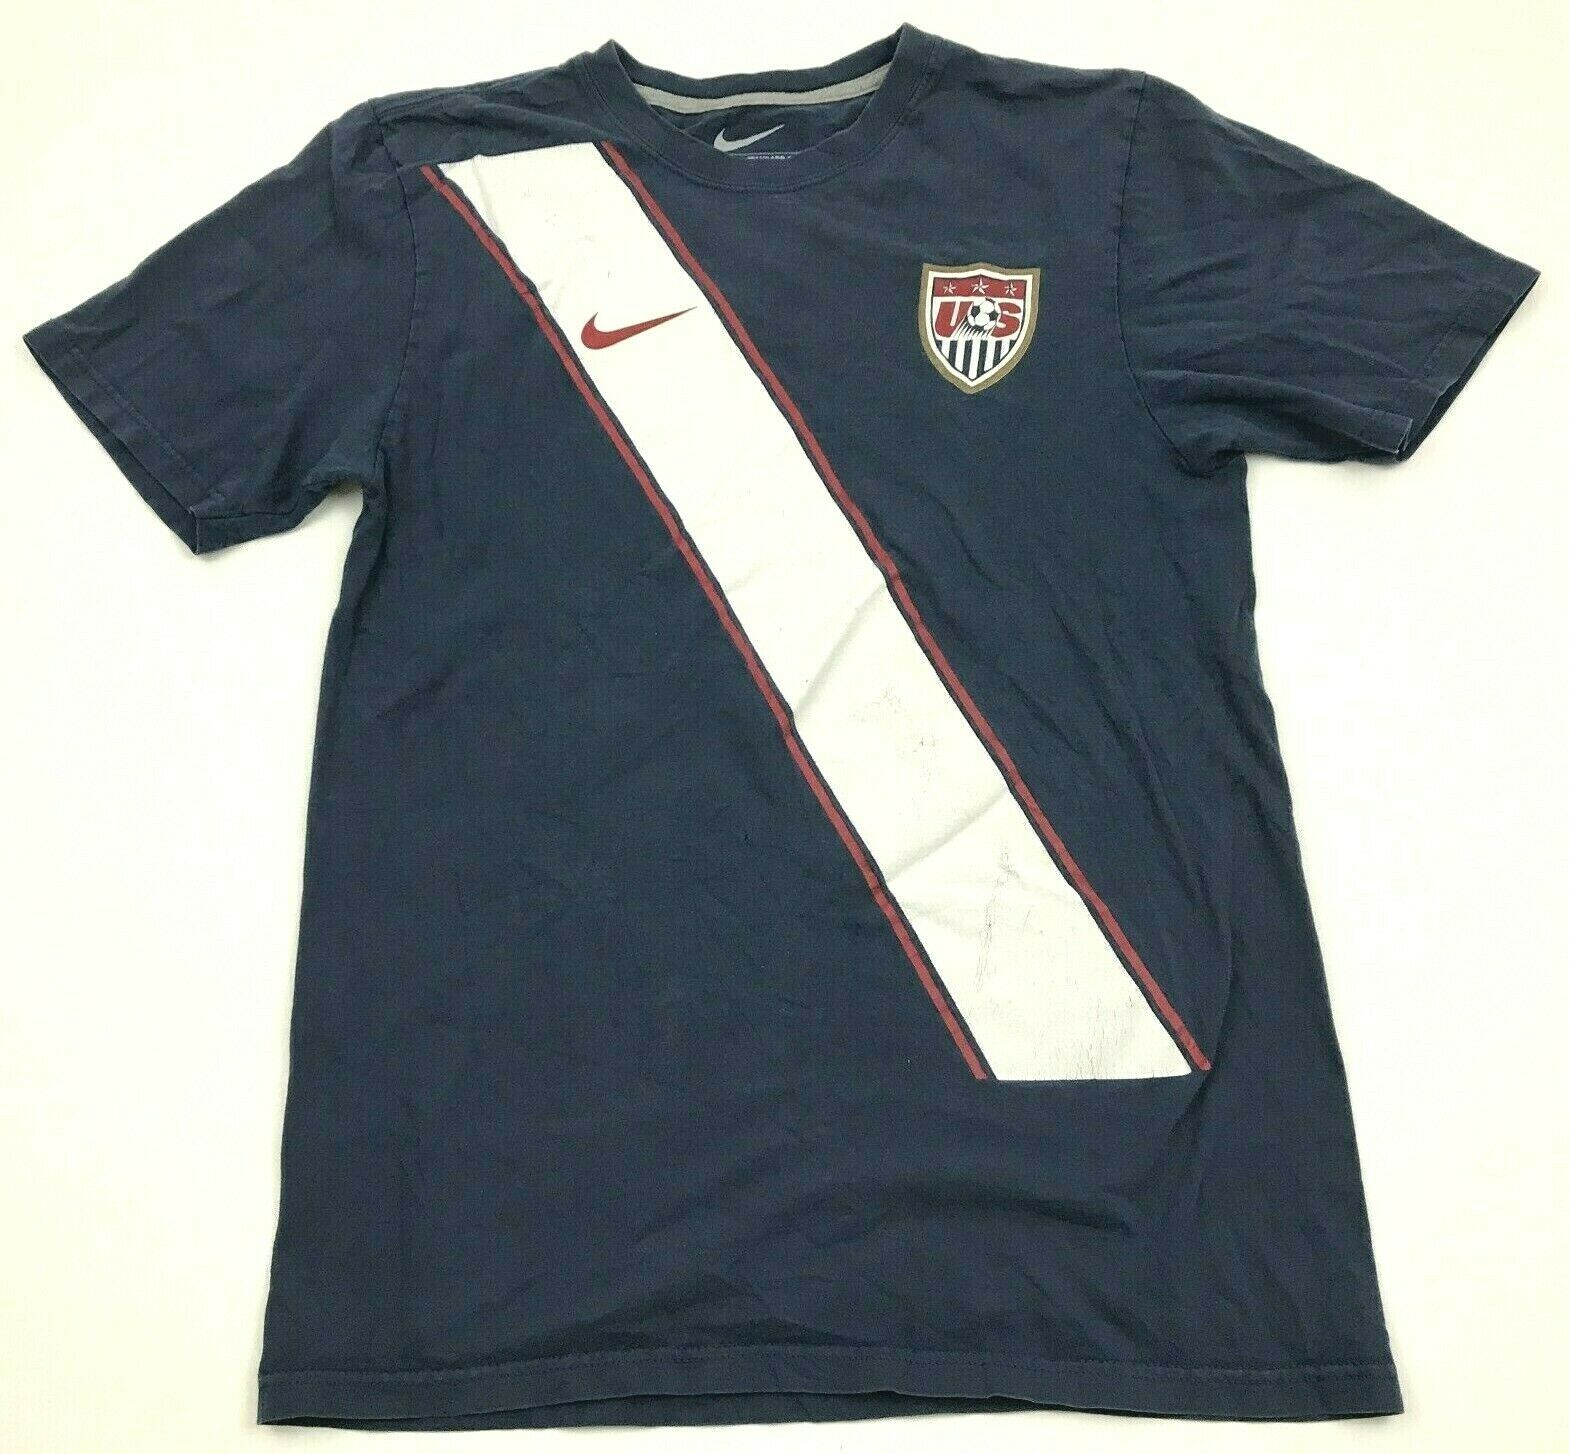 Nike Team USA Soccer Shirt Size Small Standard Fit Adult Tee Blue ...